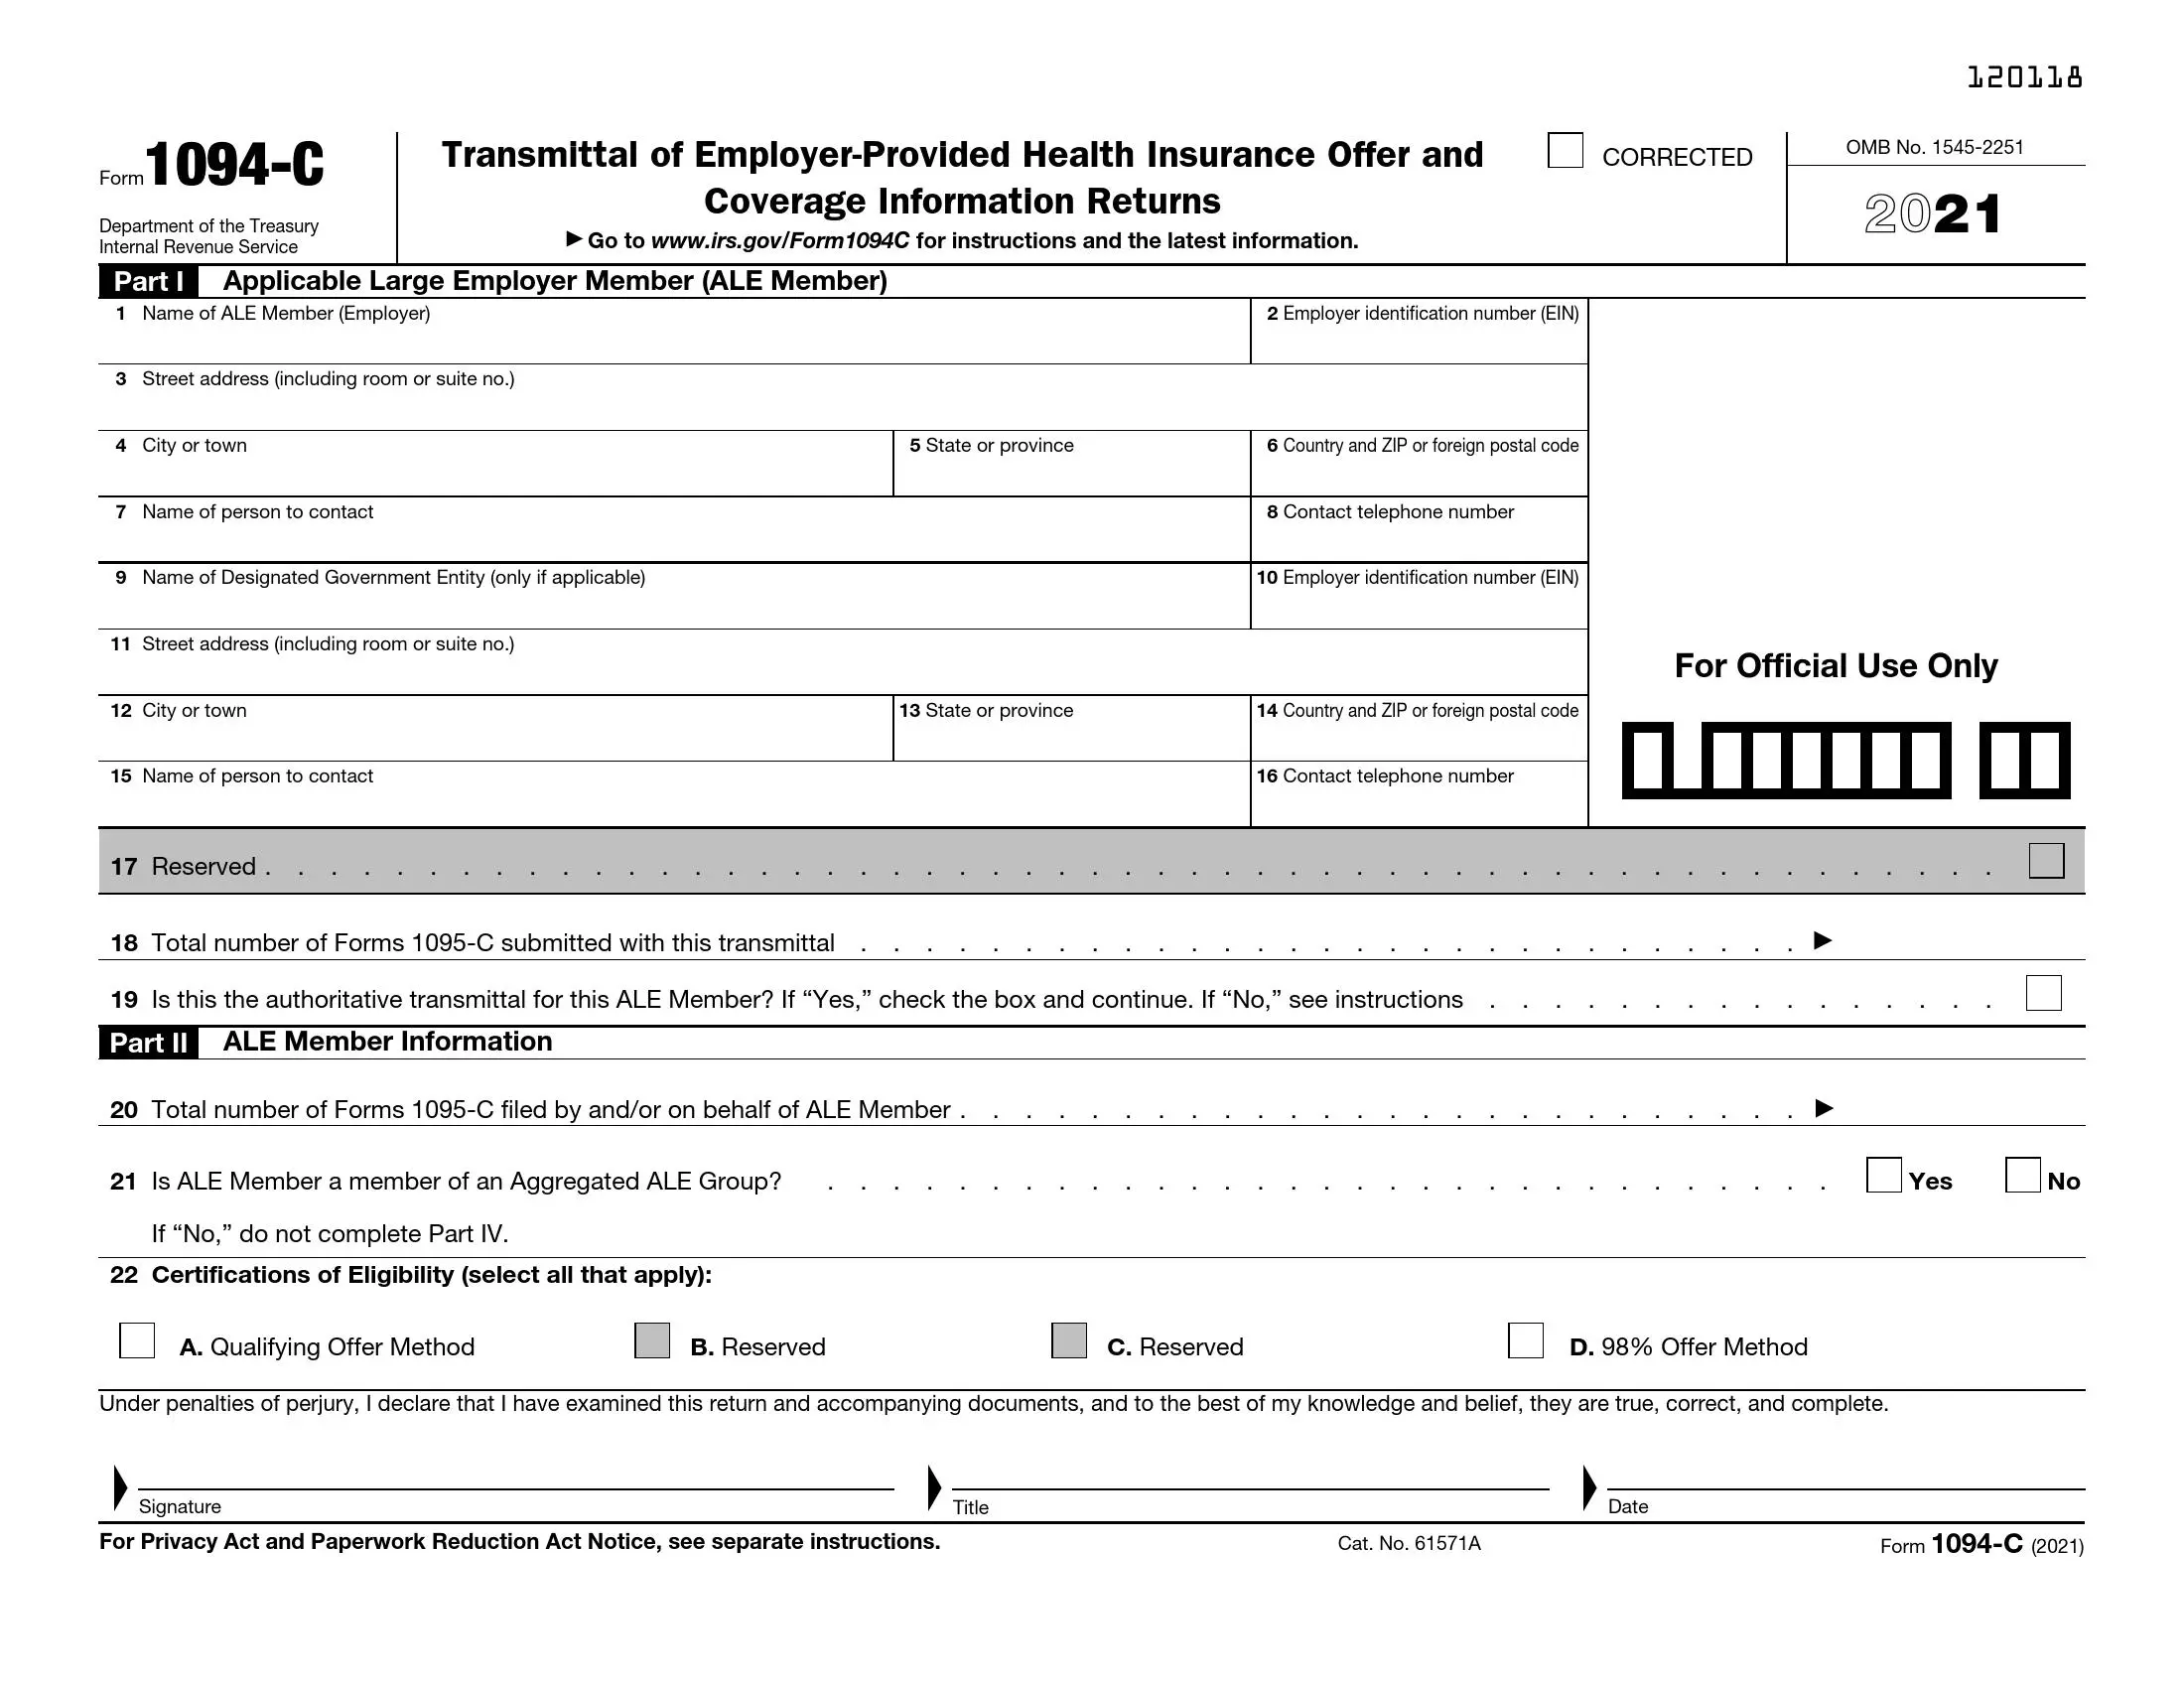 irs form 1094 c 2021 preview